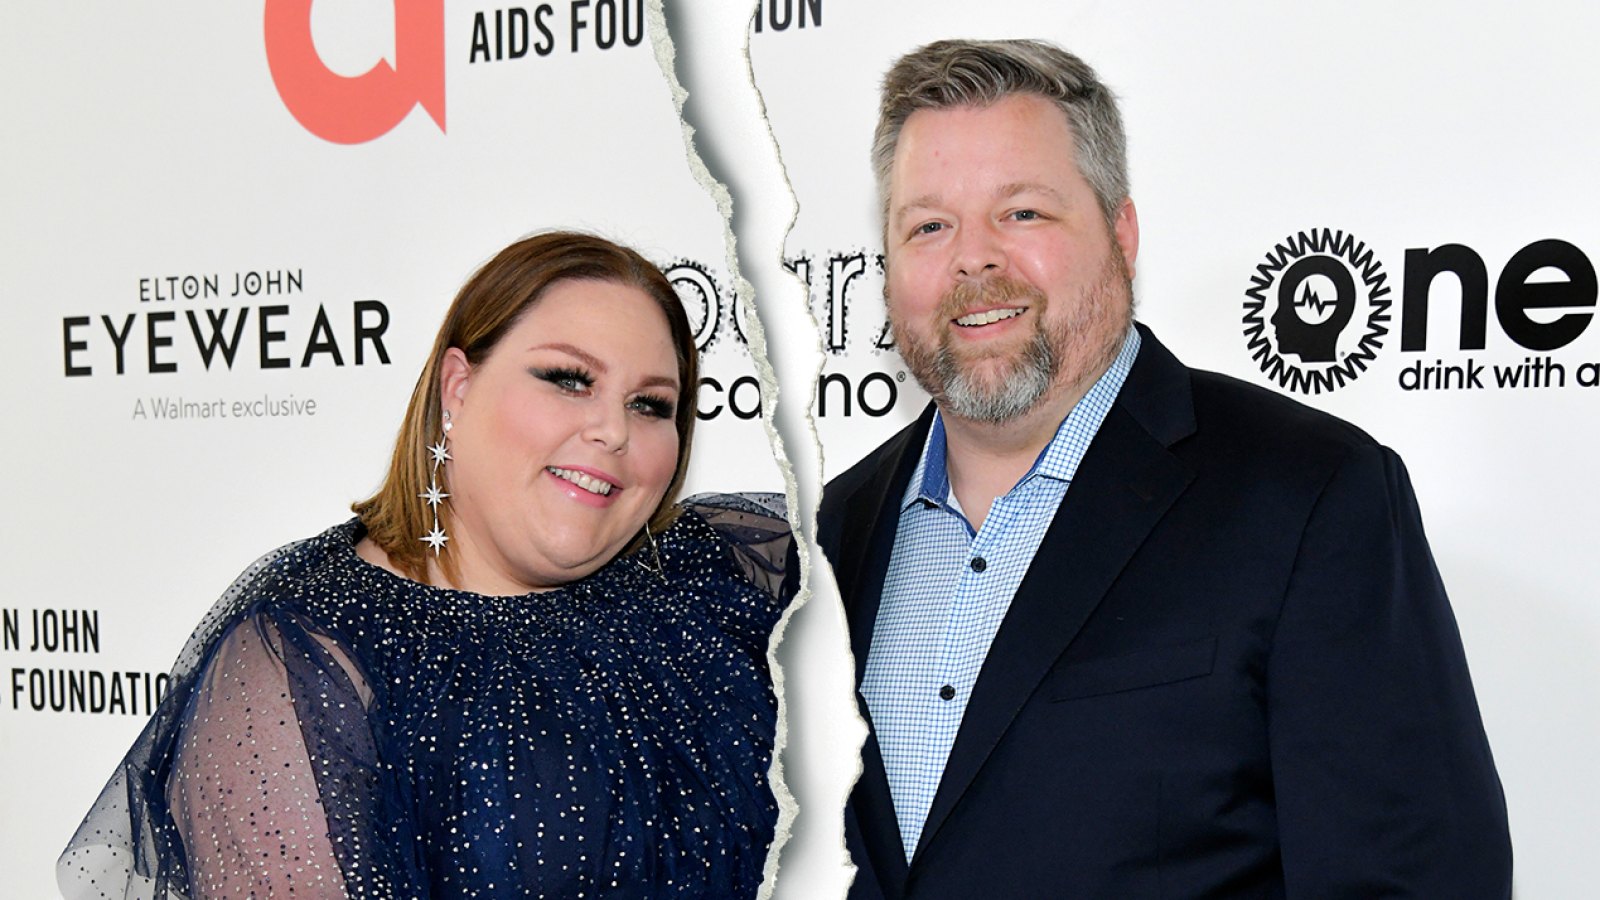 'This Is Us’ Alum Chrissy Metz and Boyfriend Bradley Collins 'Amicably' Split After 3 Years Together